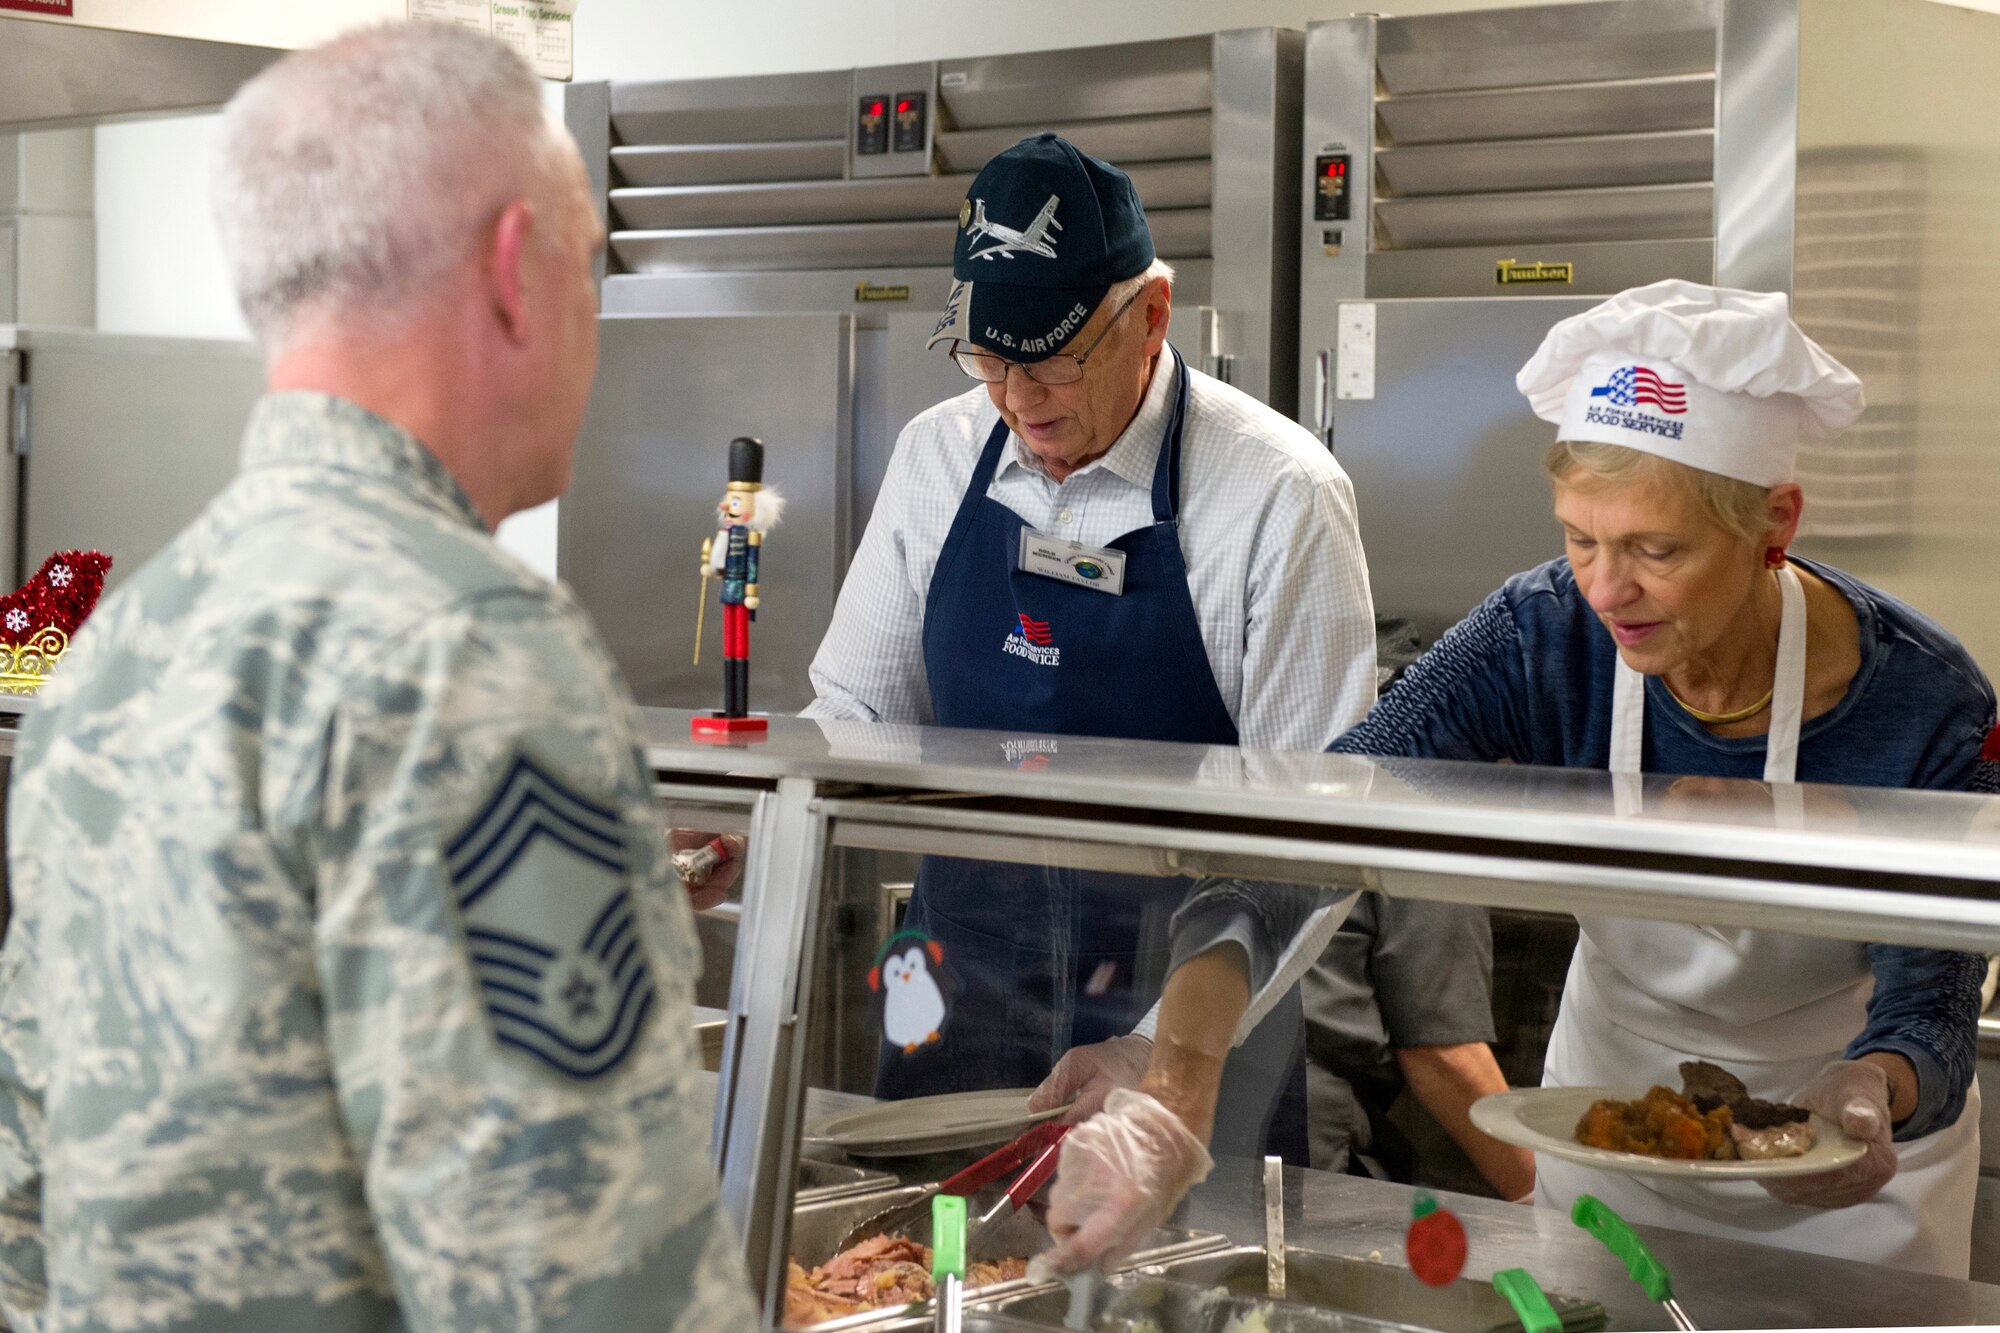 Members of the Grissom Community Council serve a holiday-themed meal in the dining facility at Grissom Air Reserve Base, Indiana, Dec. 7, 2019. The 434th Force Support Squadron prepared turkey, ham, stuffing and other holiday staples during the December Unit Training Assembly in anticipation of serving hundreds of hungry members. (U.S. Air Force photo/ Staff Sgt. Courtney Dotson-Essett)